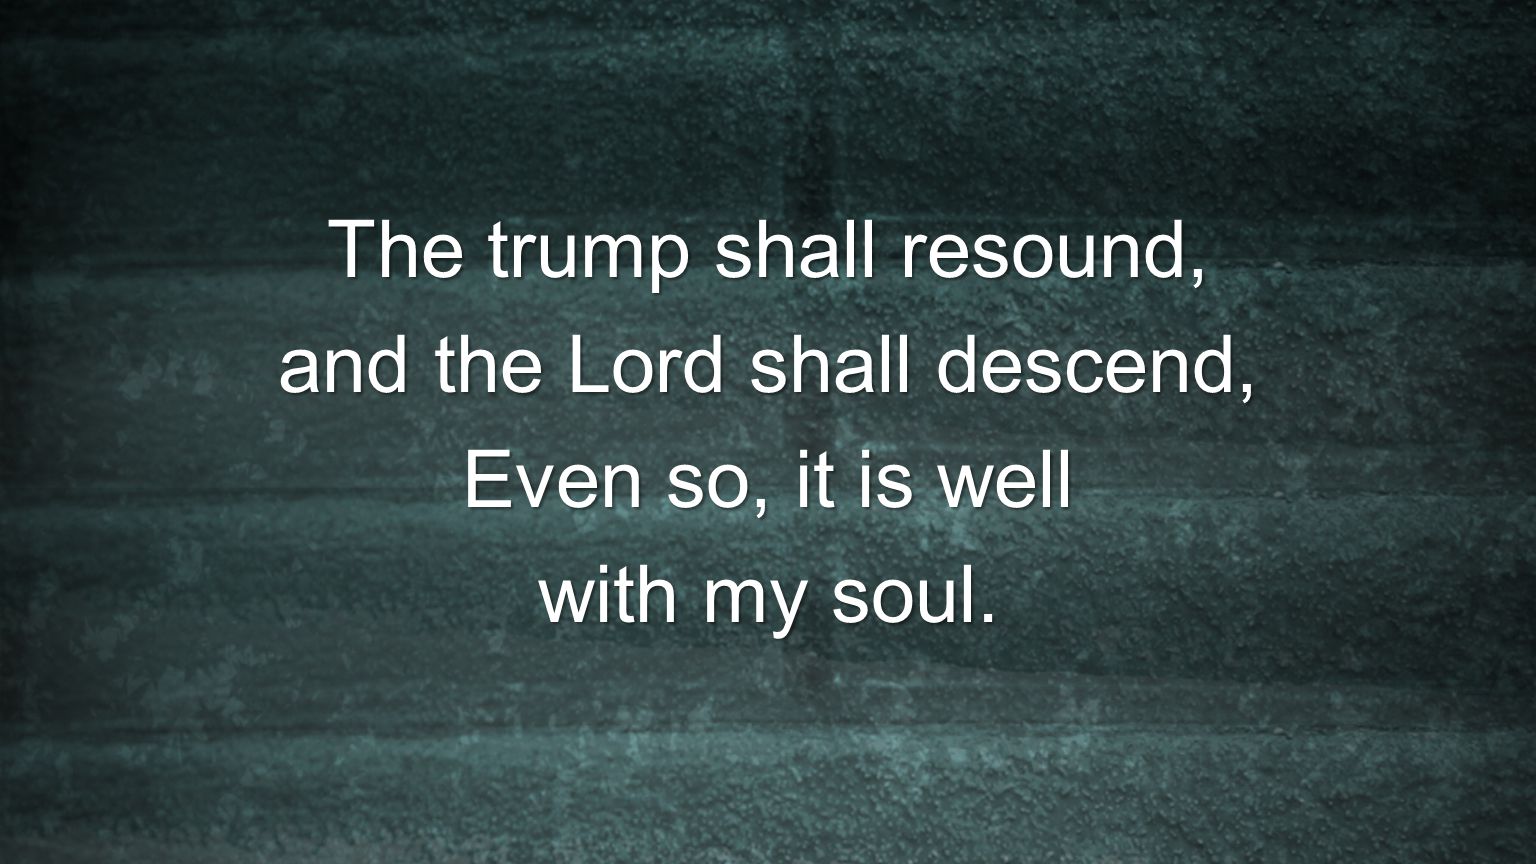 The trump shall resound, and the Lord shall descend,